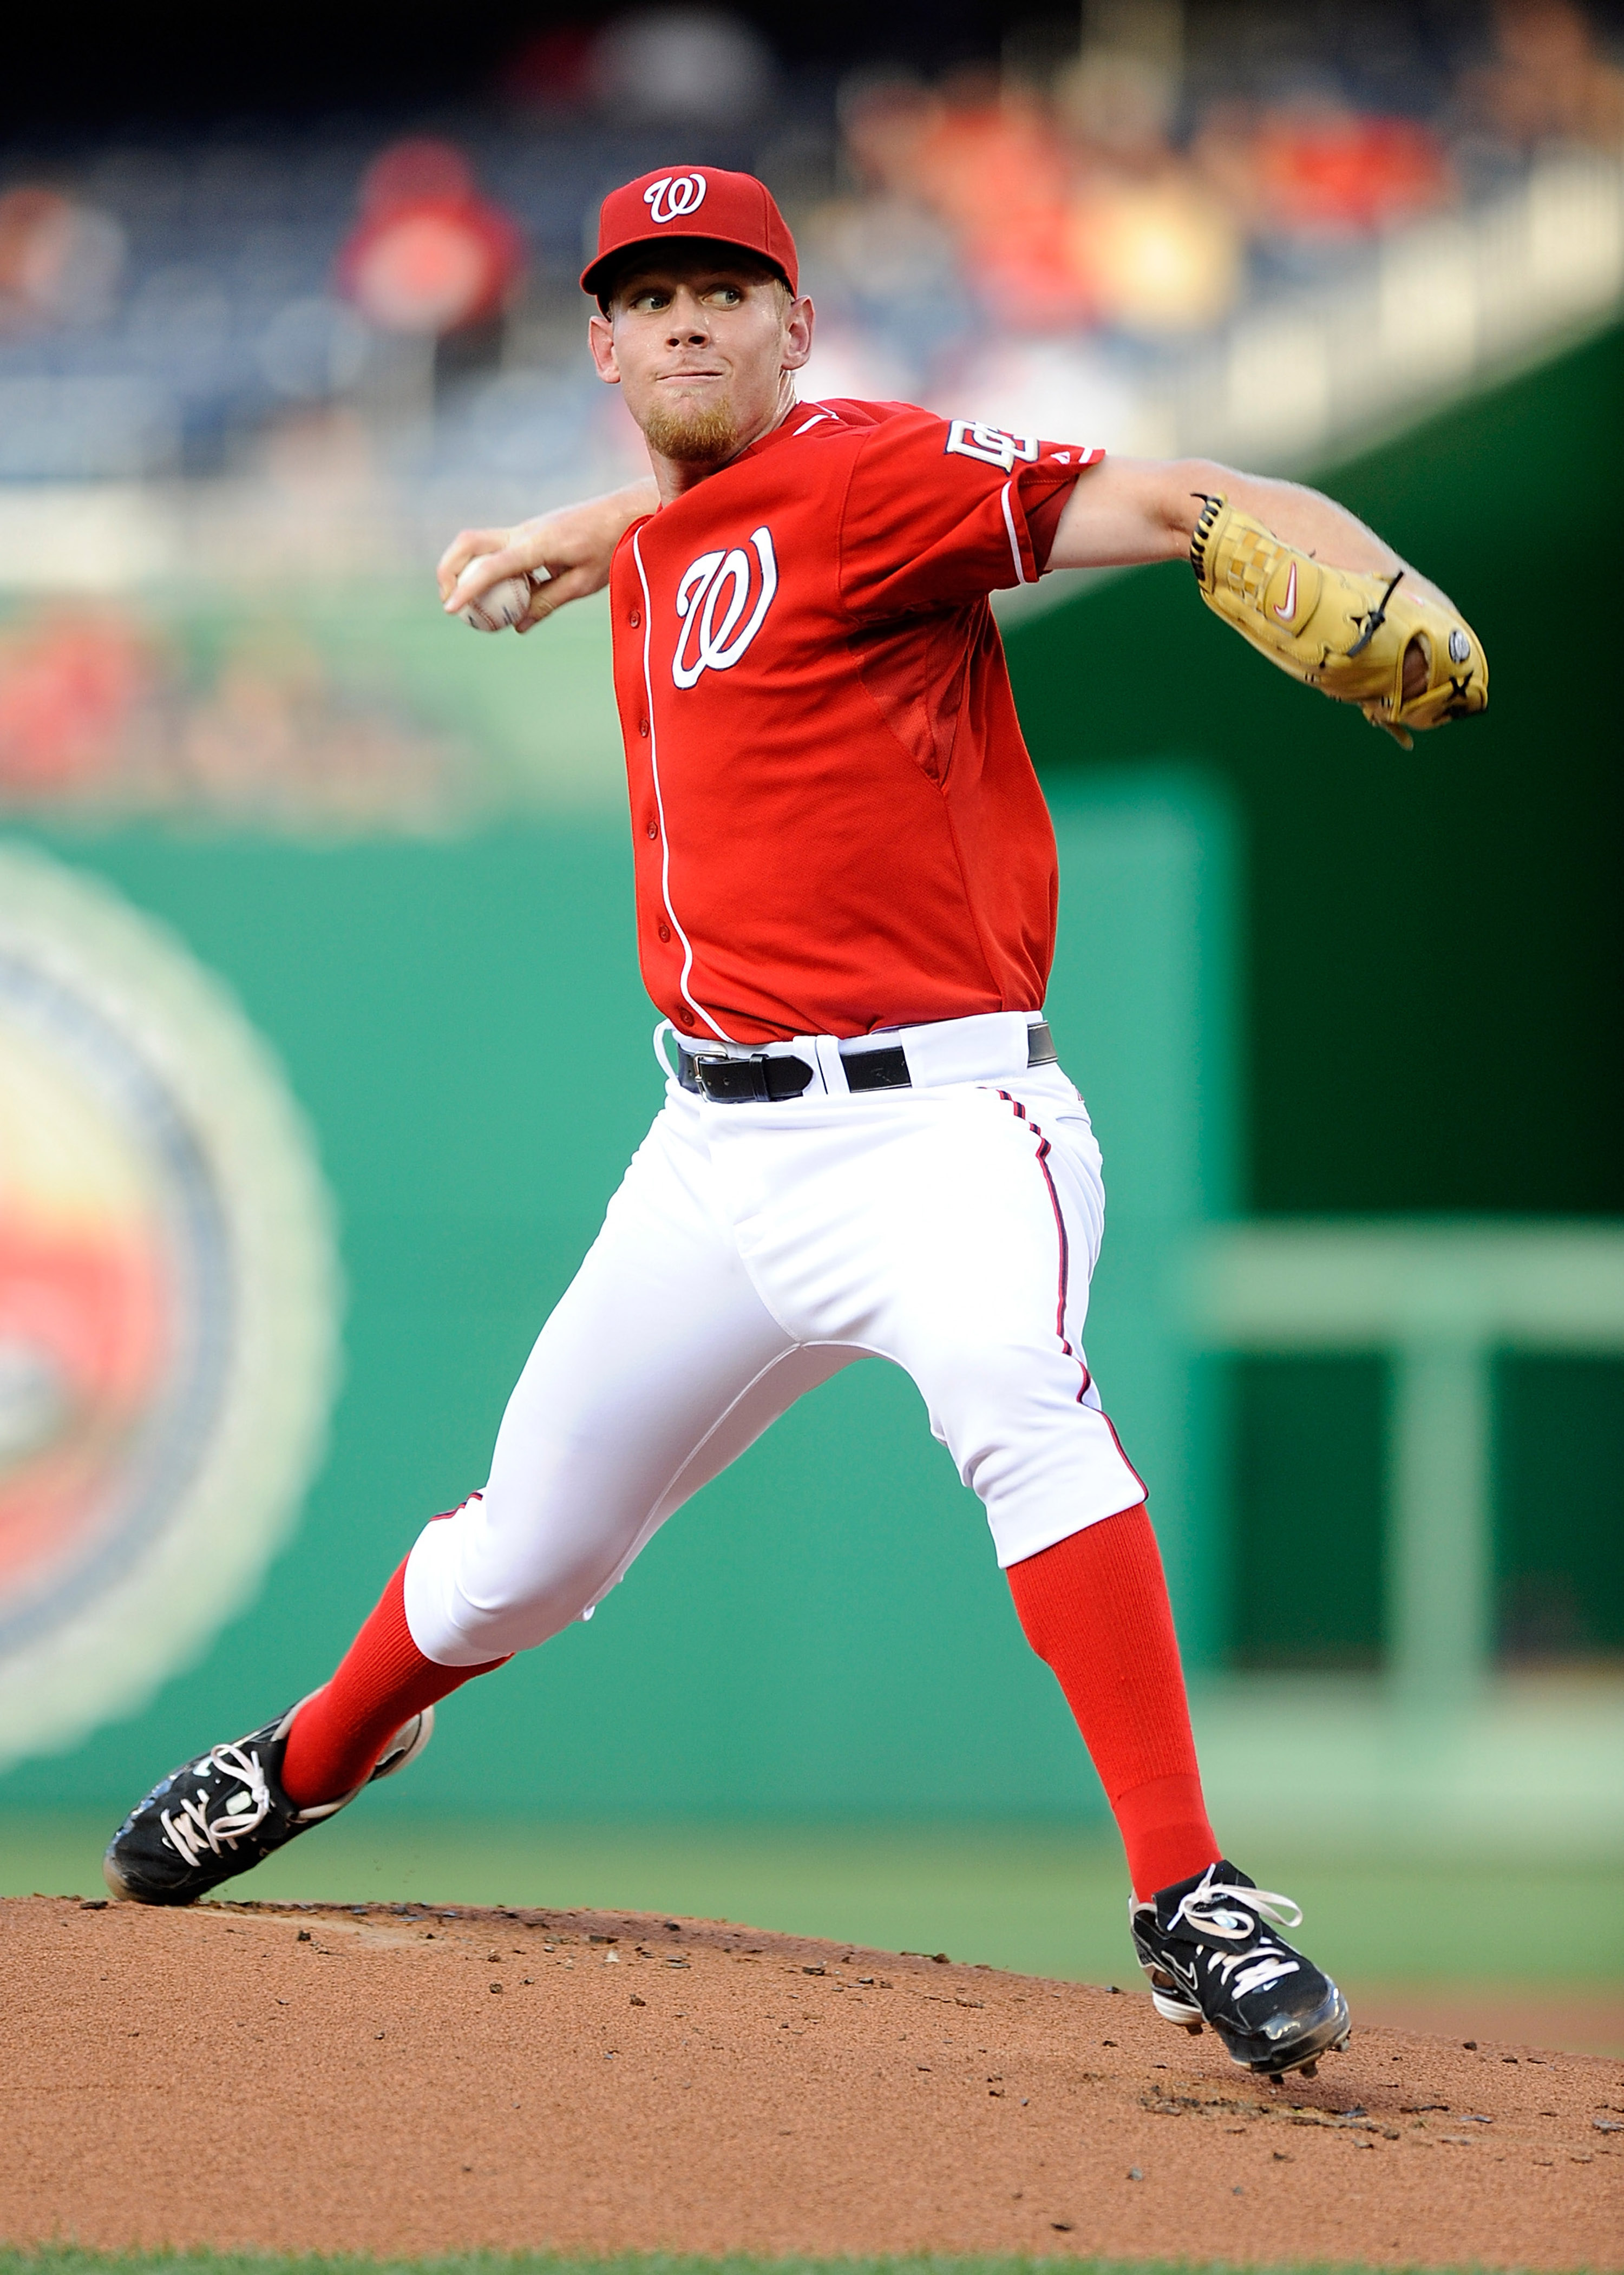 WASHINGTON - JULY 09:  Stephen Strasburg #37 of the Washington Nationals pitches against the San Francisco Giants at Nationals Park on July 9, 2010 in Washington, DC.  (Photo by Greg Fiume/Getty Images)